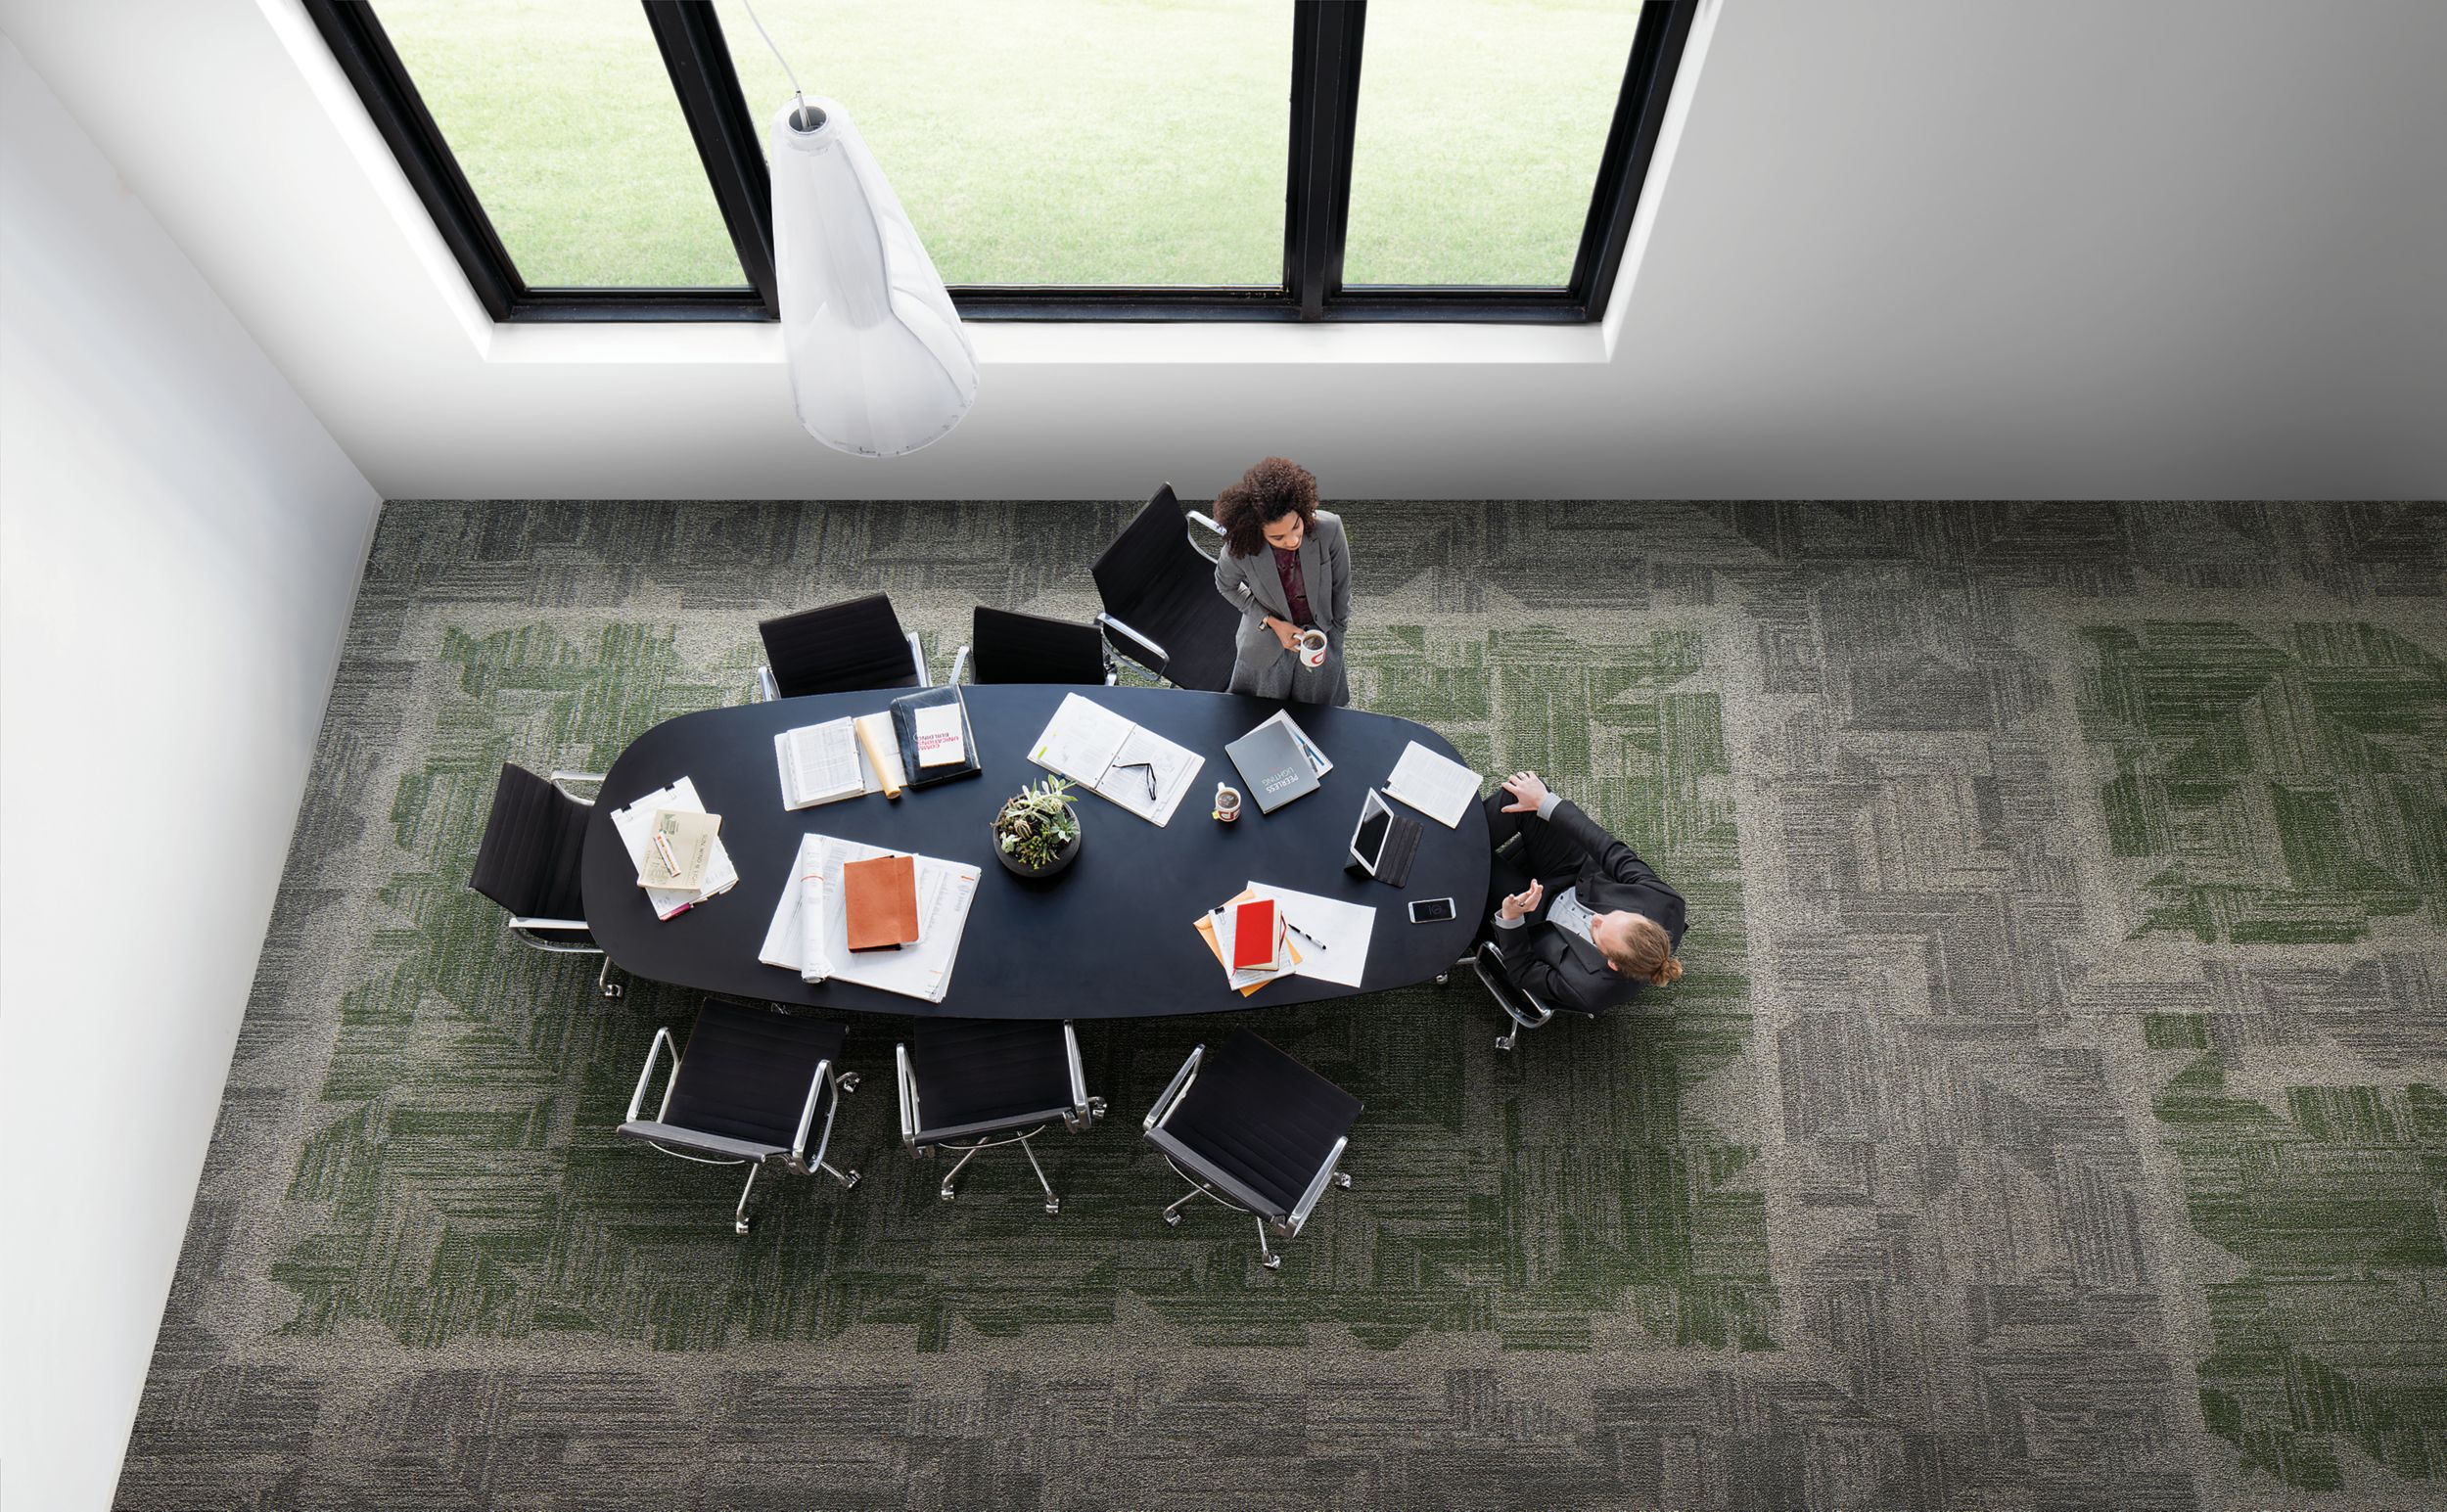 Interface Open Air 403 carpet tile in overhead view of meeting table with man and woman talking número de imagen 1